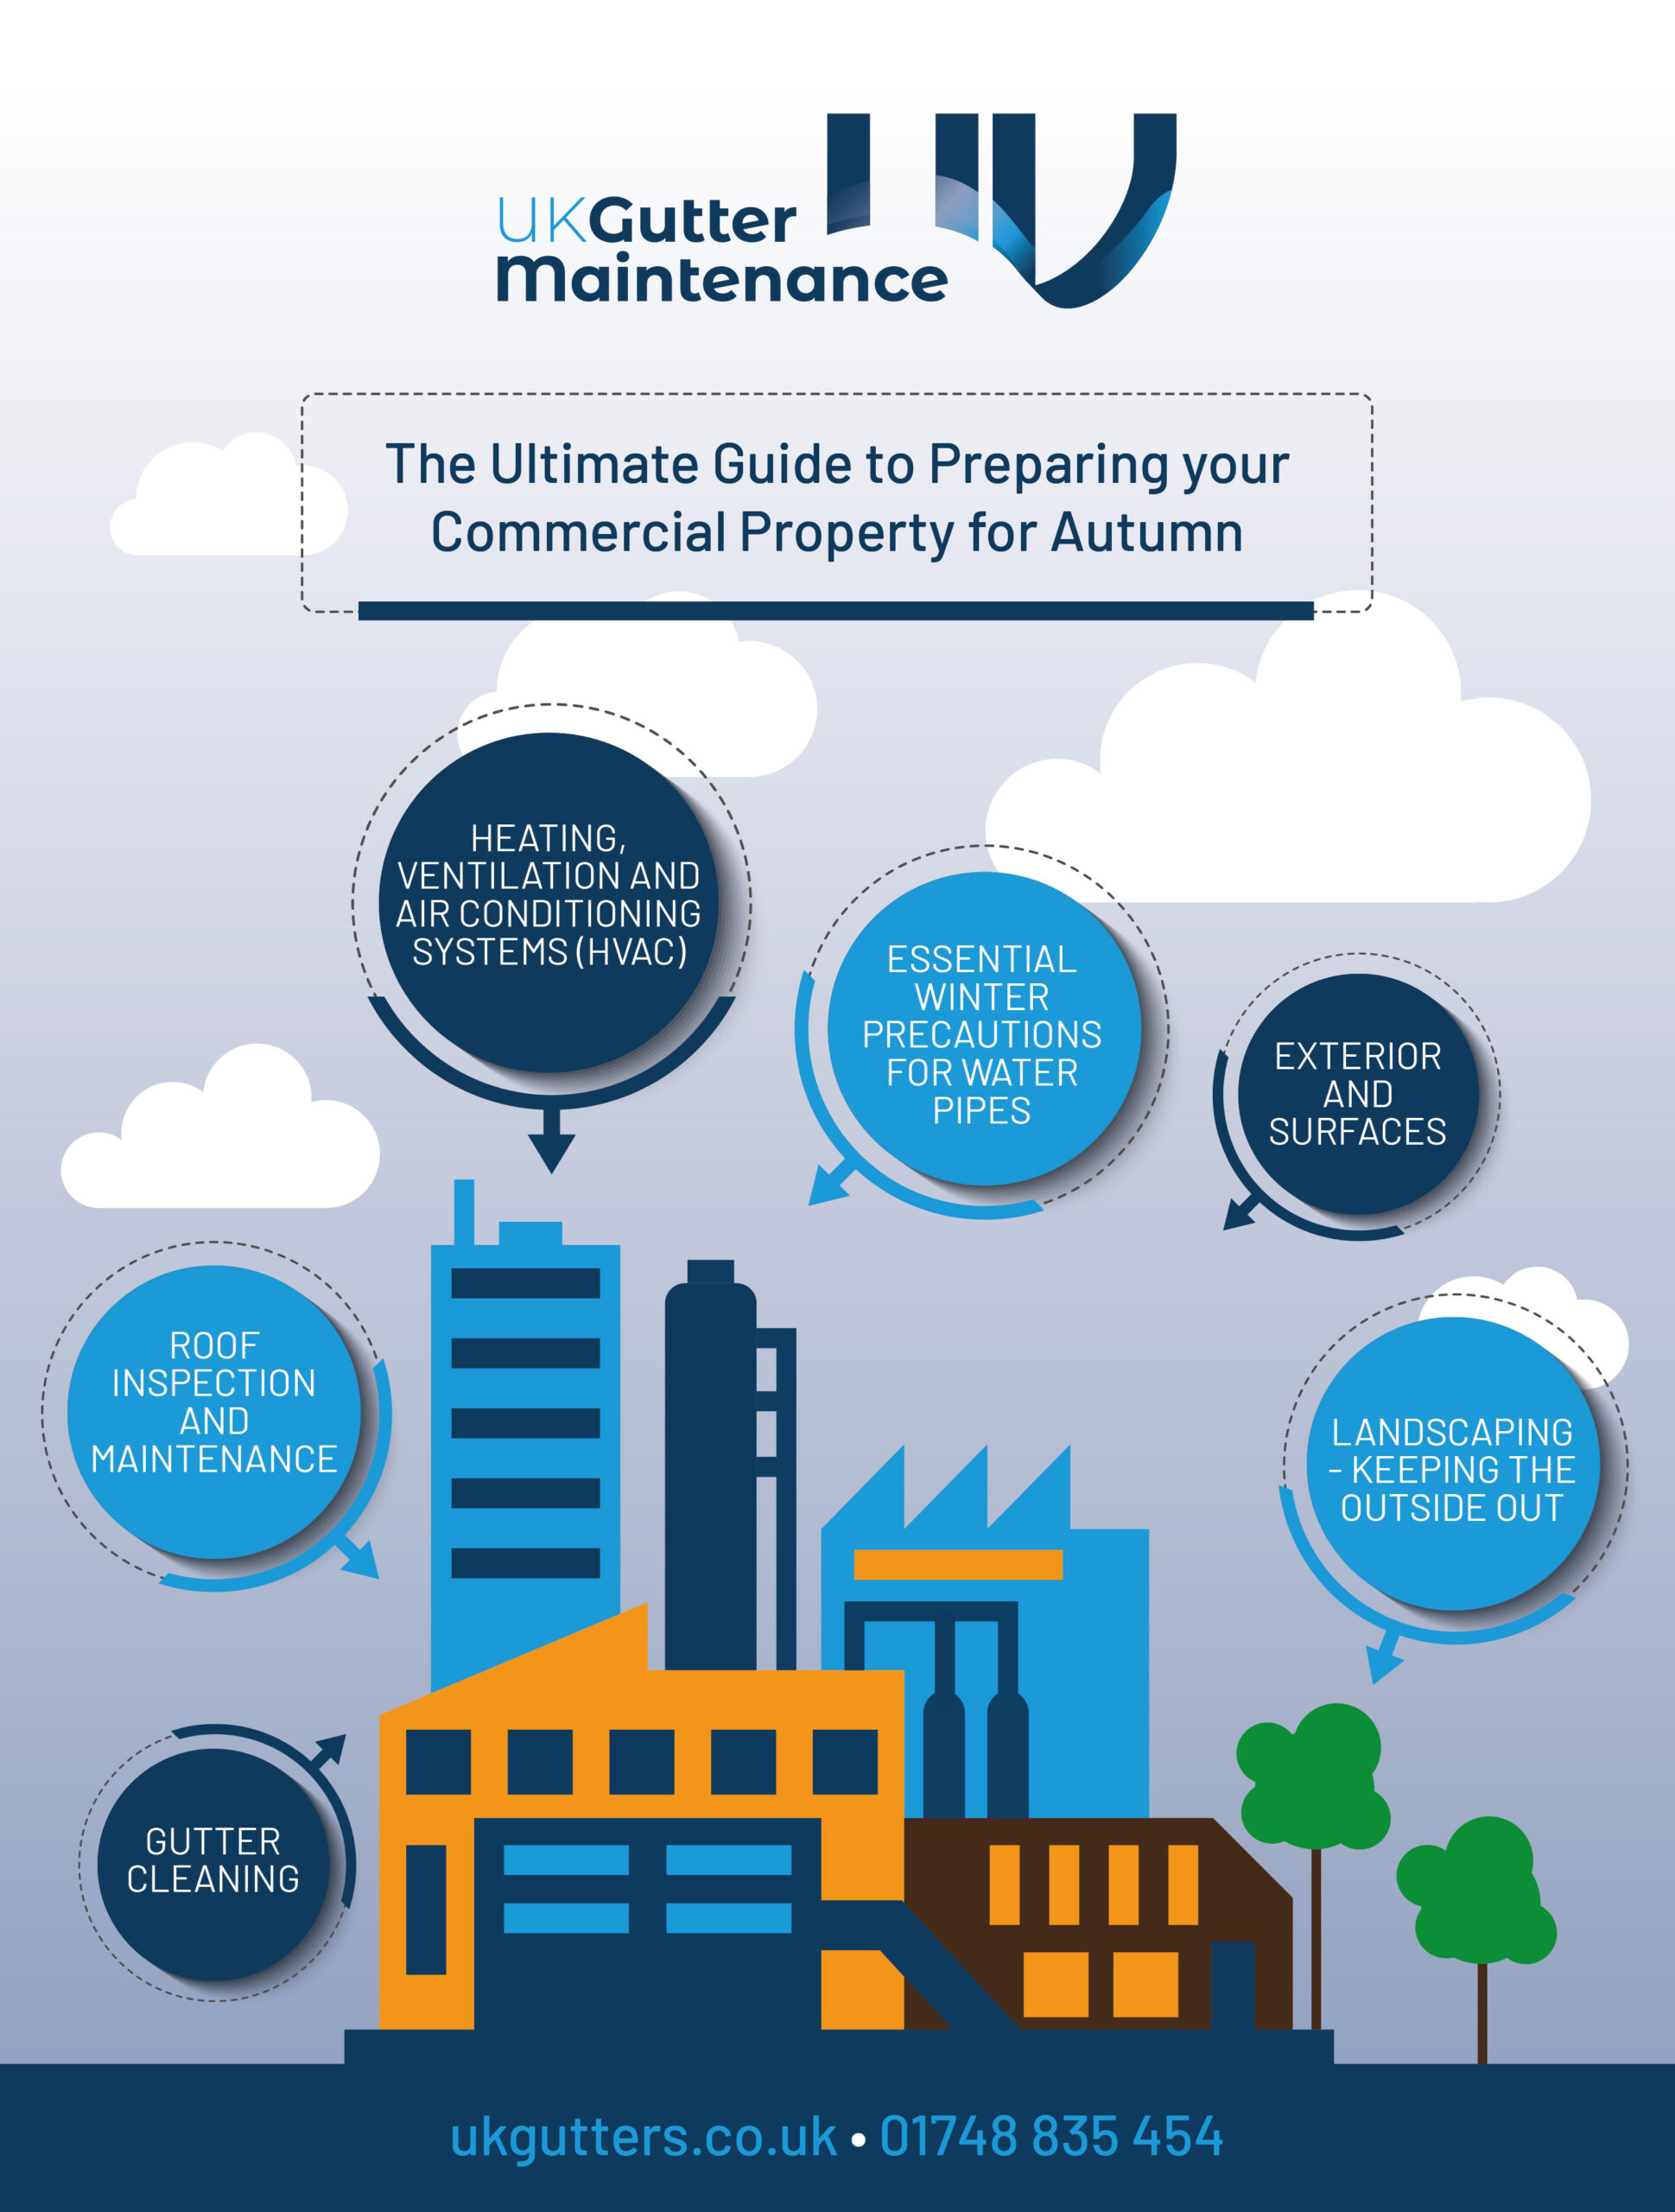 The Ultimate Guide to Preparing your Commercial Property for Autumn